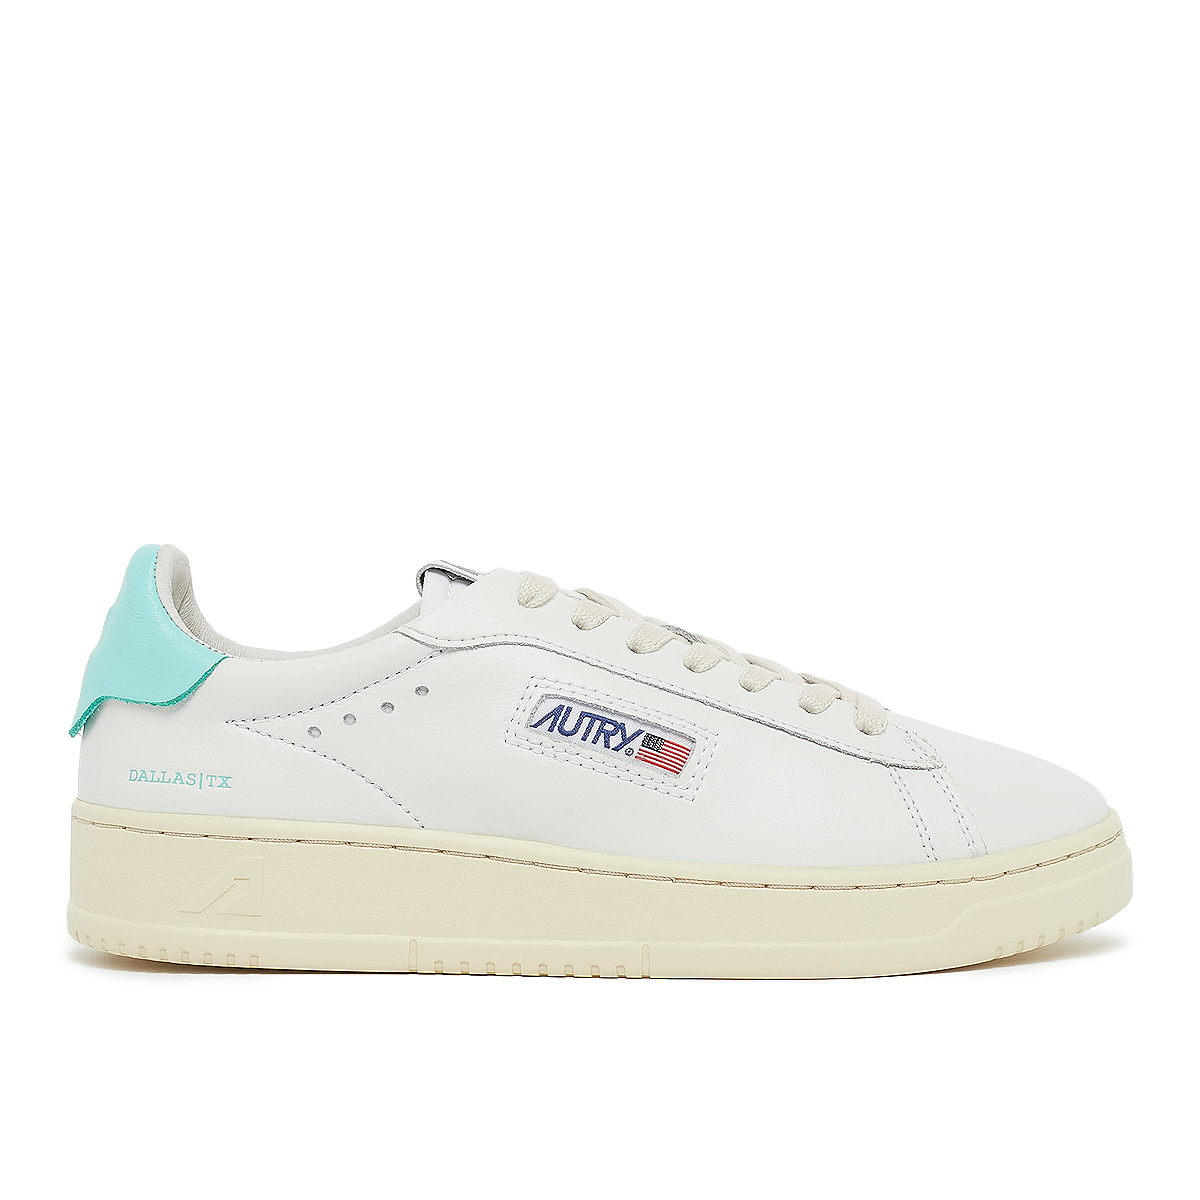 Wmns Dallas Low - ADLWNW11